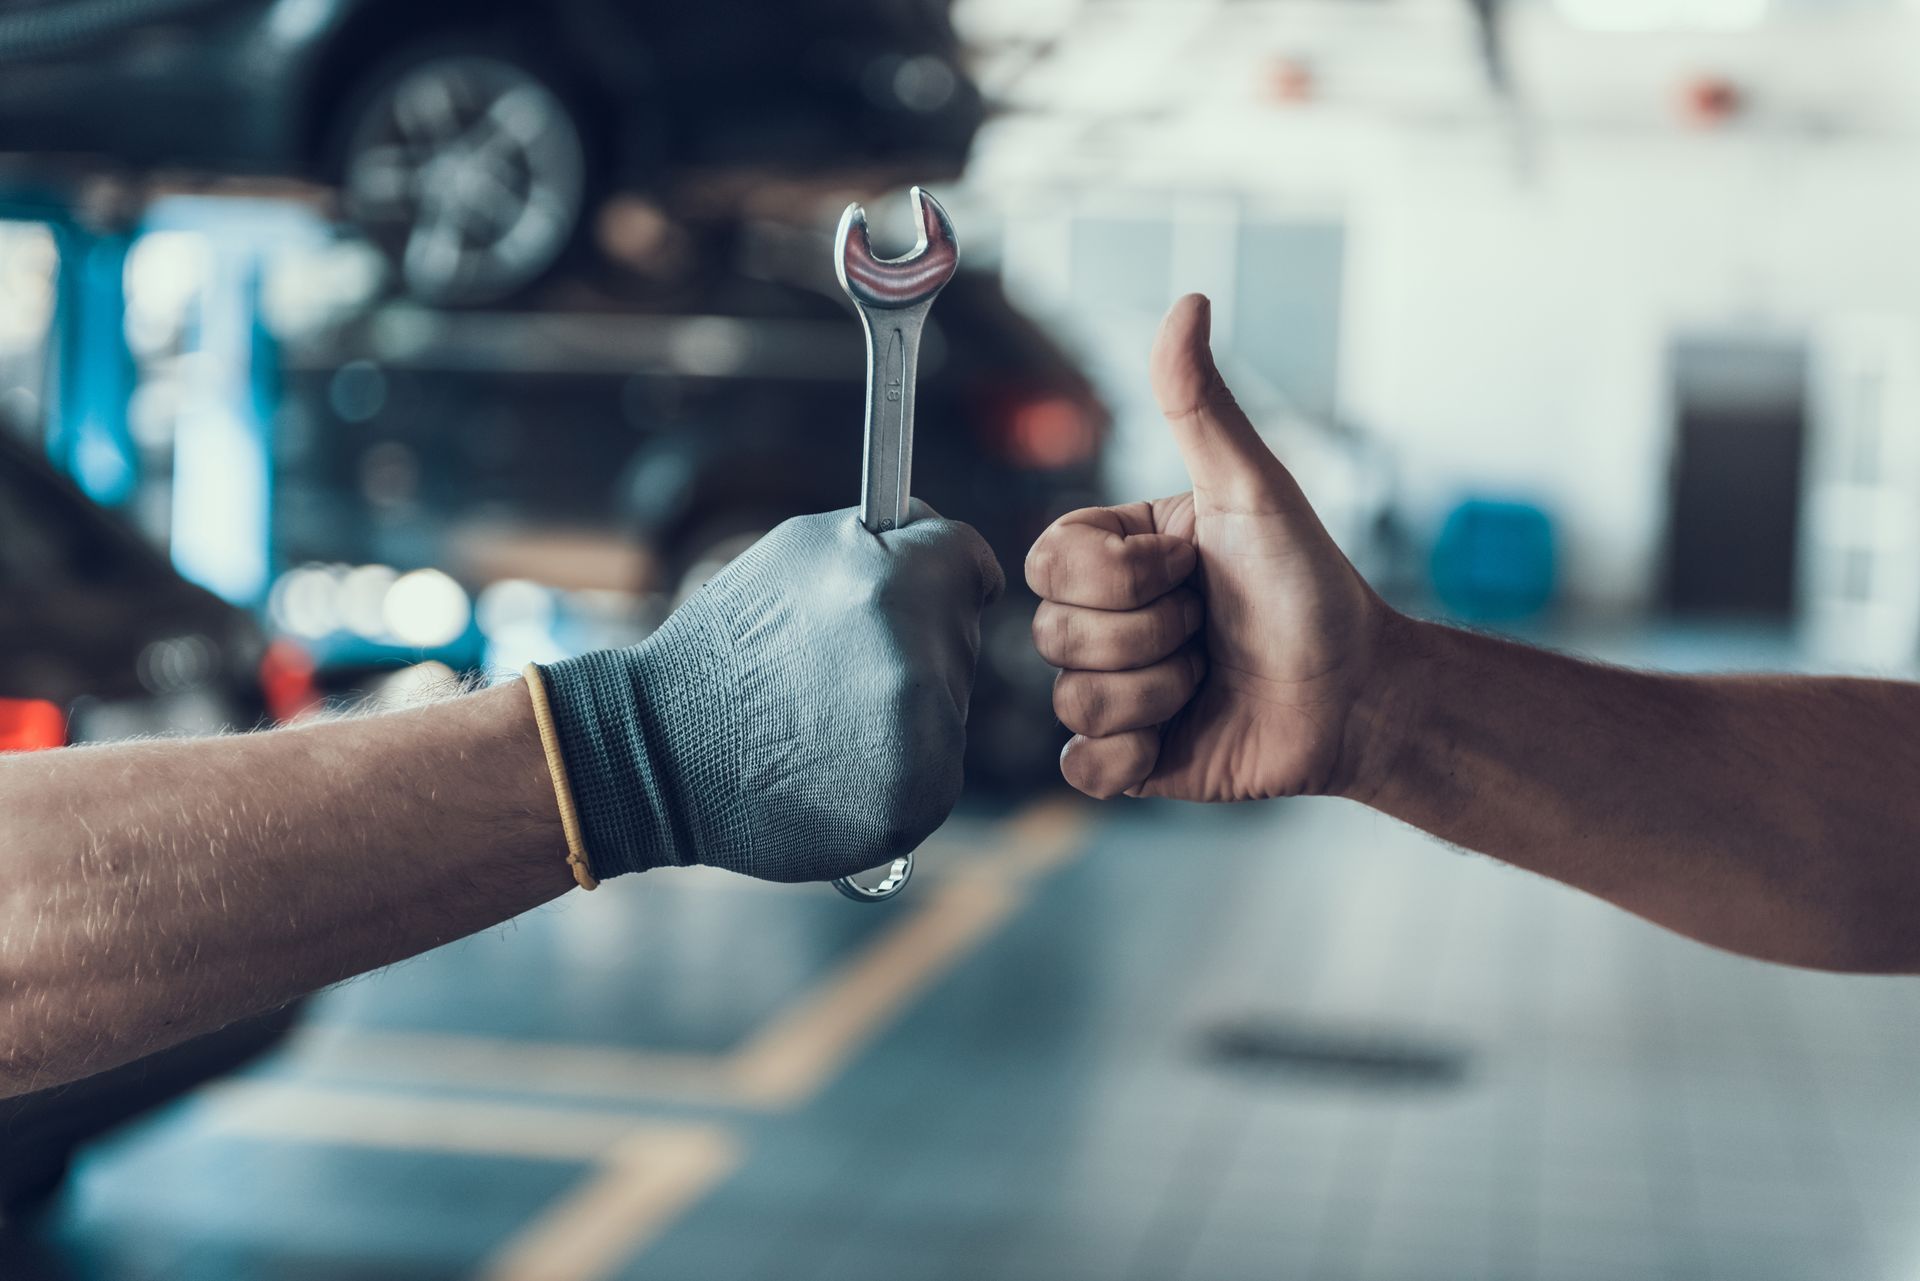 Two men are holding a wrench and giving a thumbs up in an body repair shop